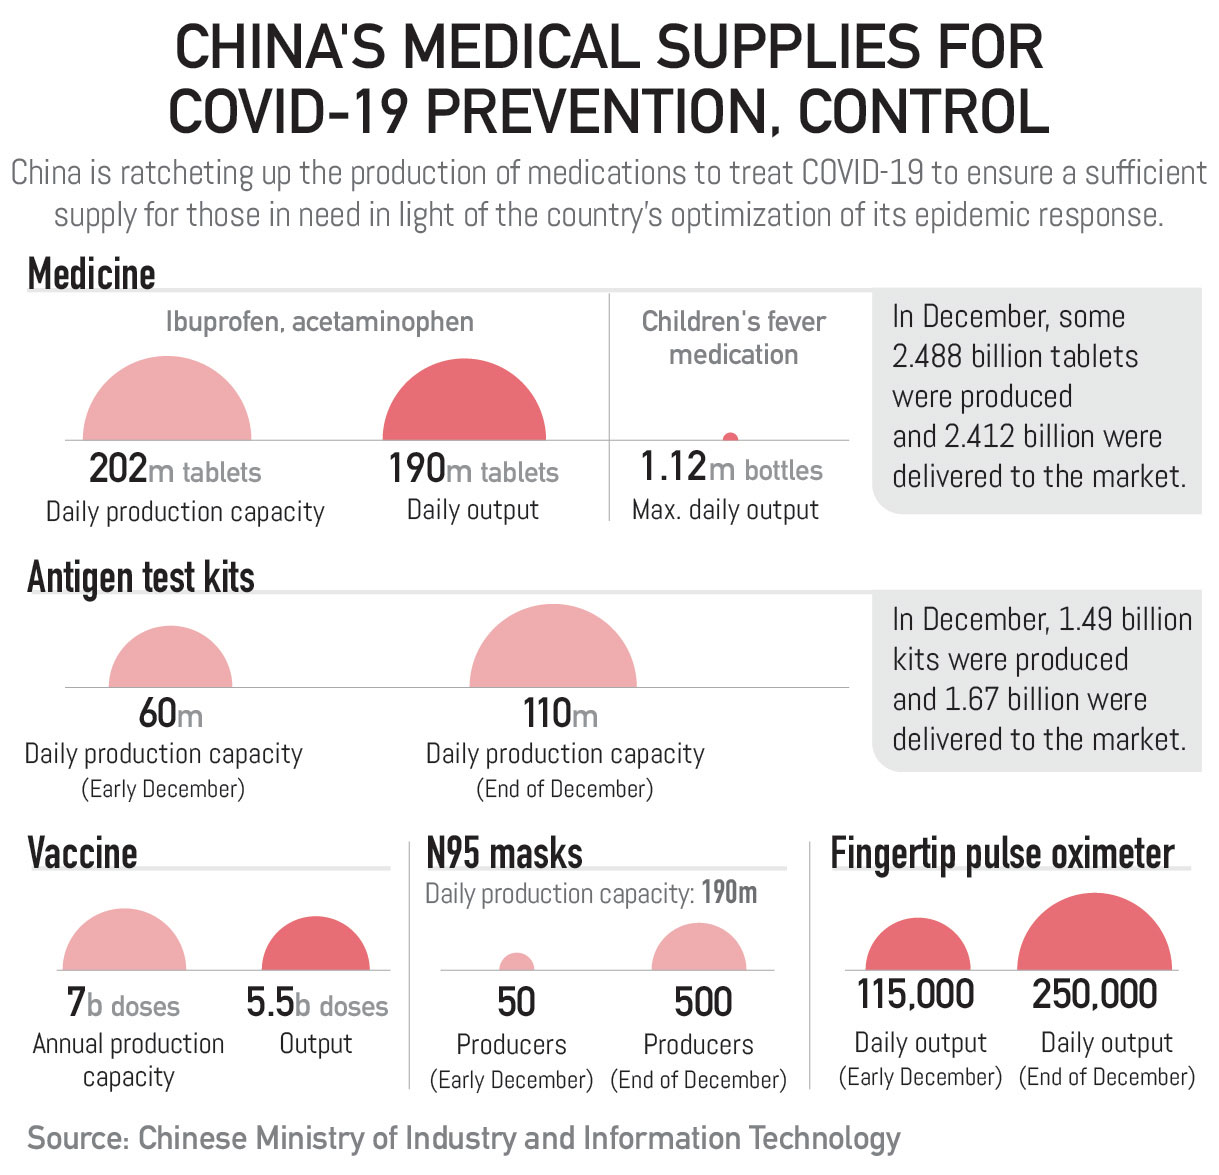 Chart of the Day: Data shows China's endeavors and progress in COVID response